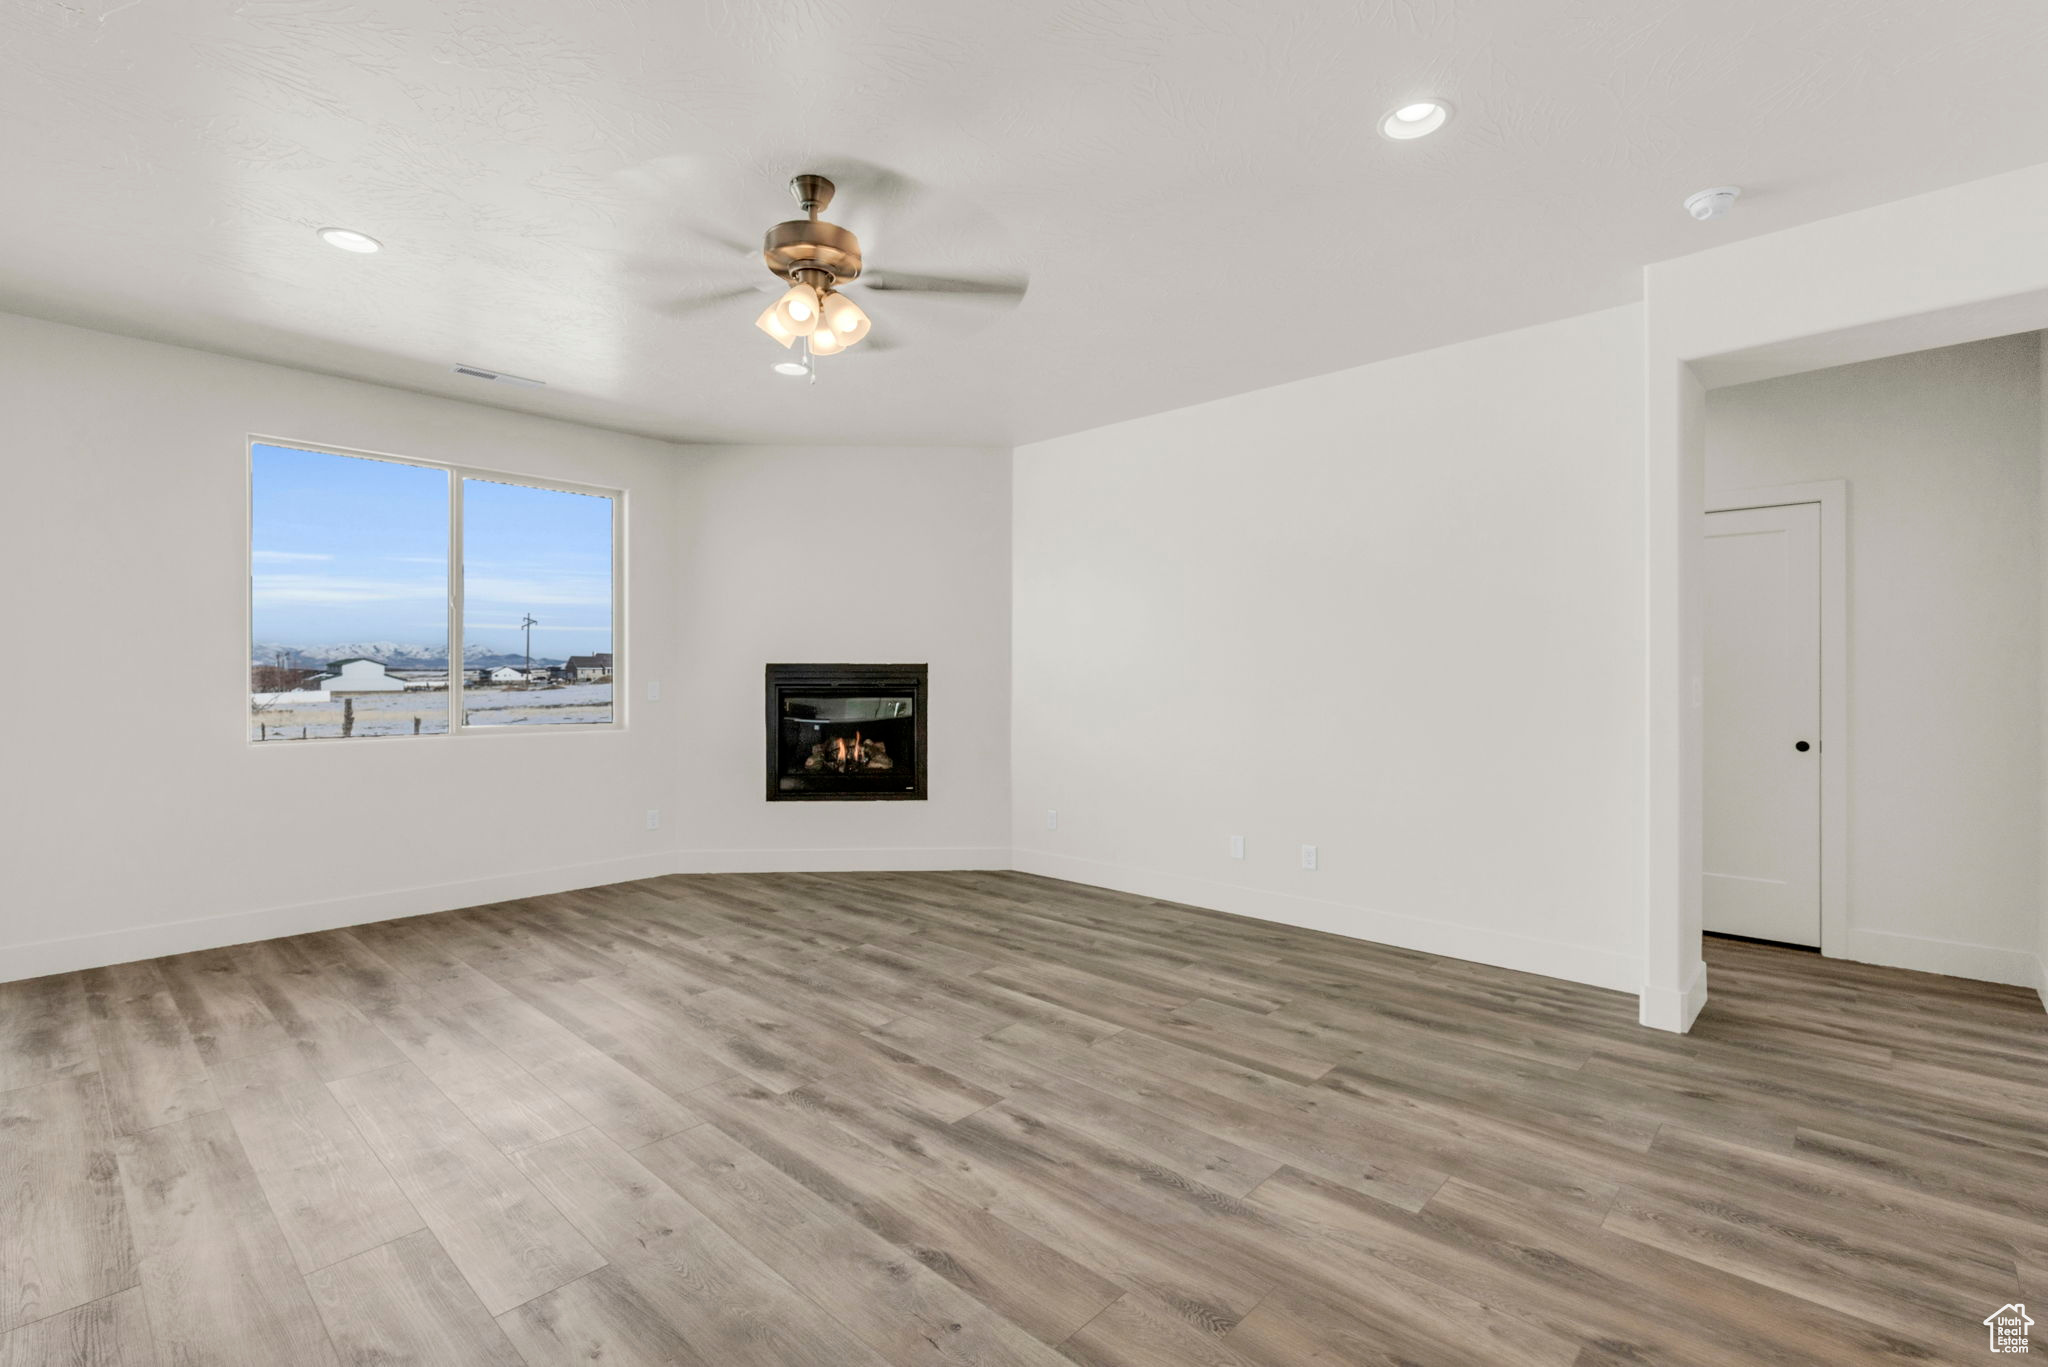 Unfurnished living room featuring light wood-type flooring, ceiling fan, and gas fireplace